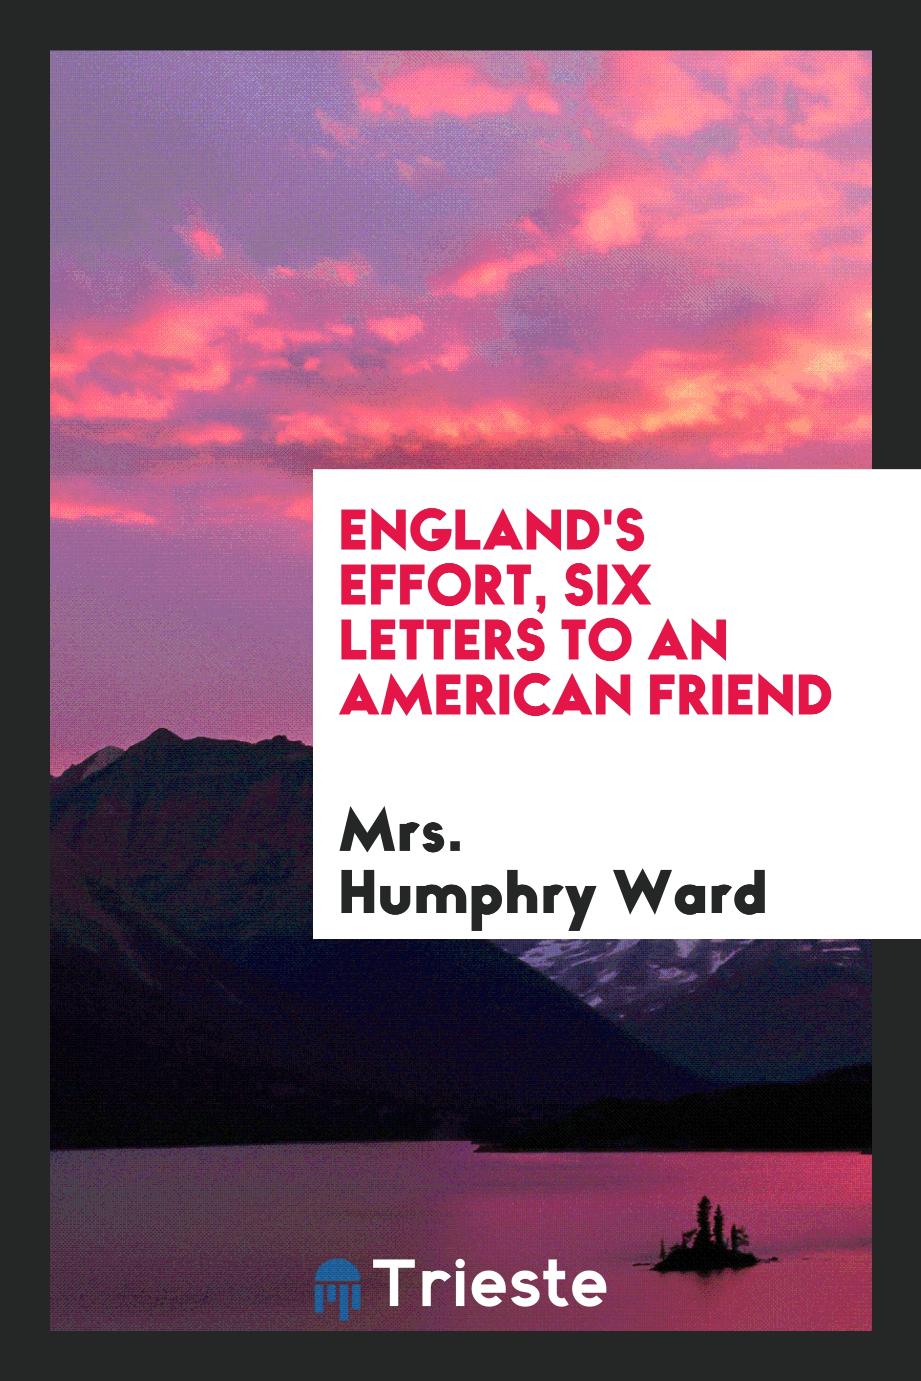 Mrs. Humphry Ward - England's effort, six letters to an American friend